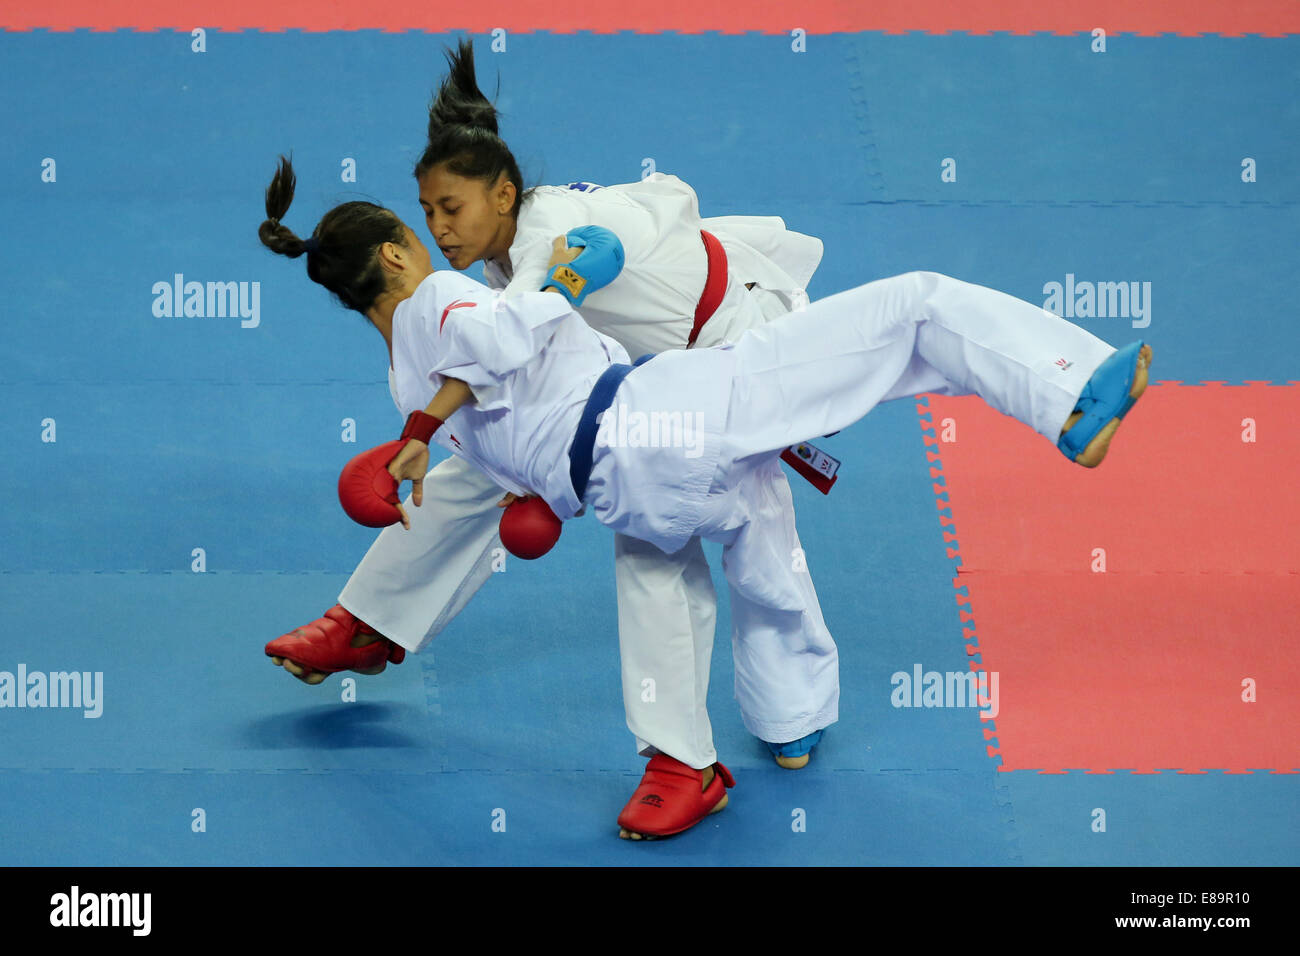 Incheon, South Korea. 3rd Oct, 2014. Yin Xiaoyan (lower) of China fights against Jefry Krisnan Syakilla Salni Binti of Malaysia during the women's -61kg semifinal contest of karate at the 17th Asian Games in Incheon, South Korea, Oct. 3, 2014. Yin Xiaoyan lost 0-2. © Zhang Fan/Xinhua/Alamy Live News Stock Photo